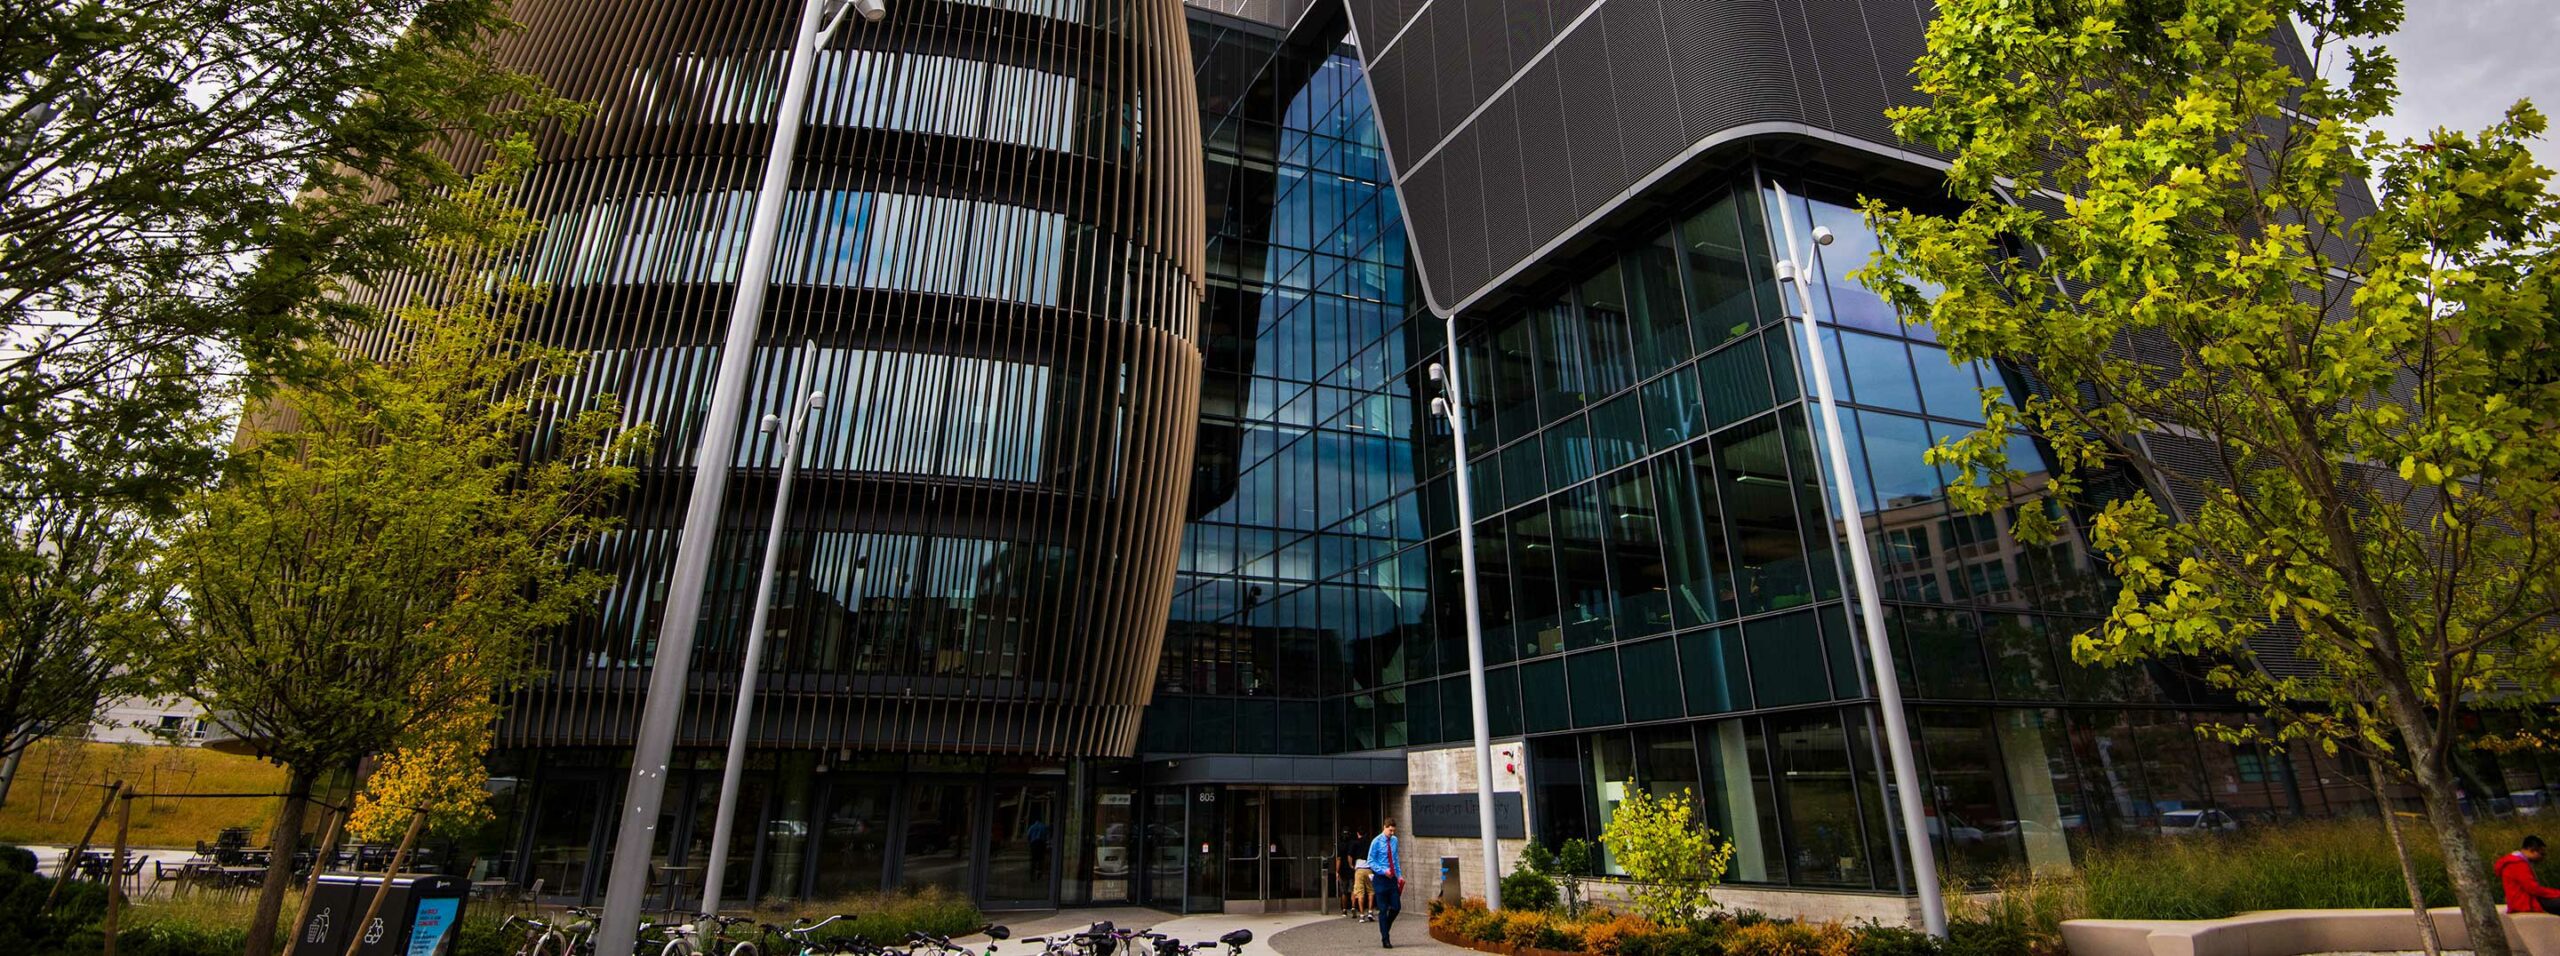 The Interdisciplinary Science and Engineering Center on Northeastern's Boston campus